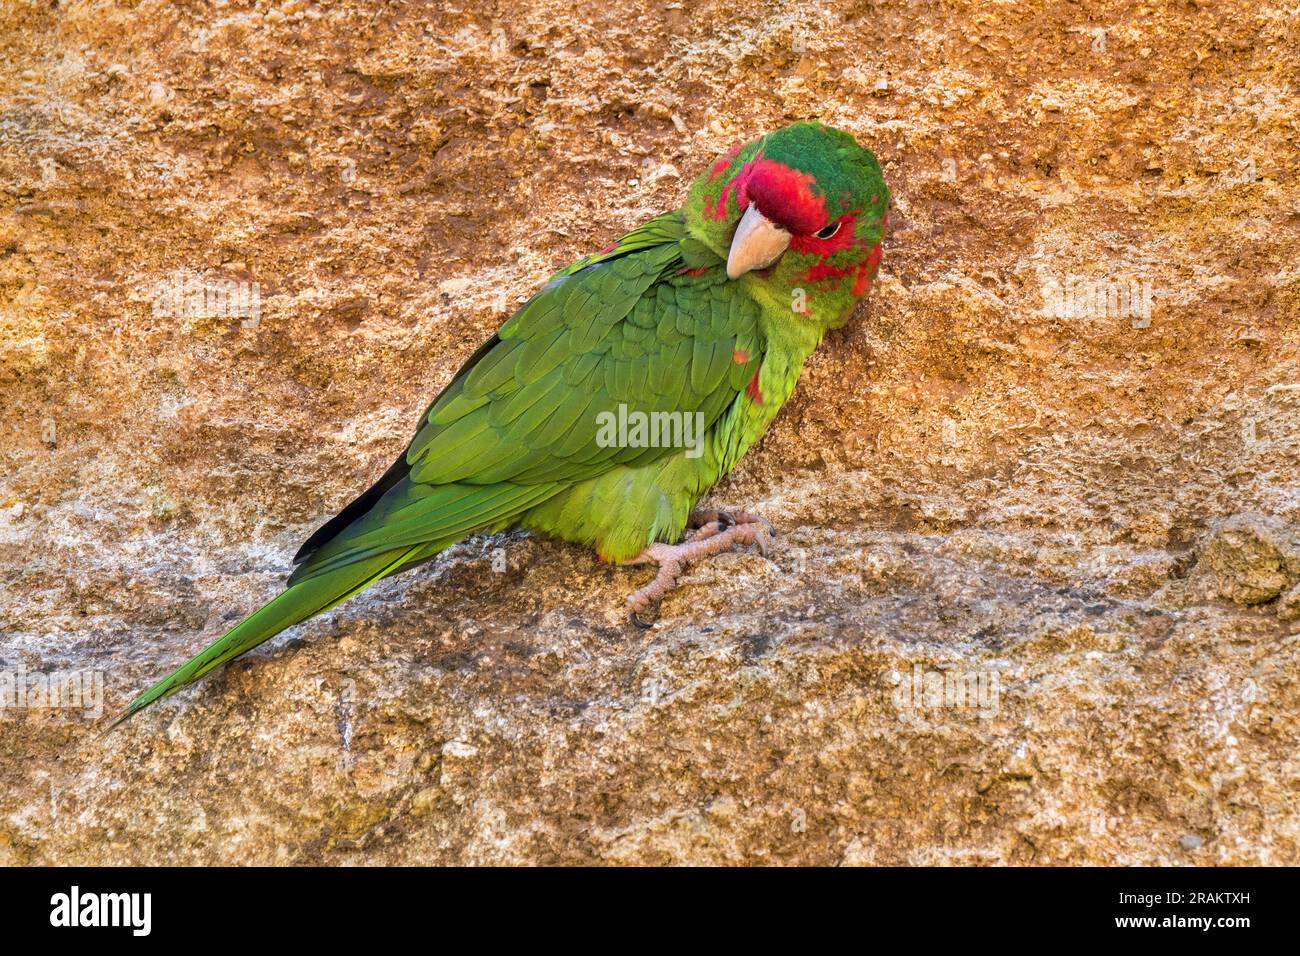 Mitred parakeet / mitred conure (Psittacara mitratus) on rock ledge in cliff face, native to South American Andes from Peru, Bolivia to Argentina Stock Photo